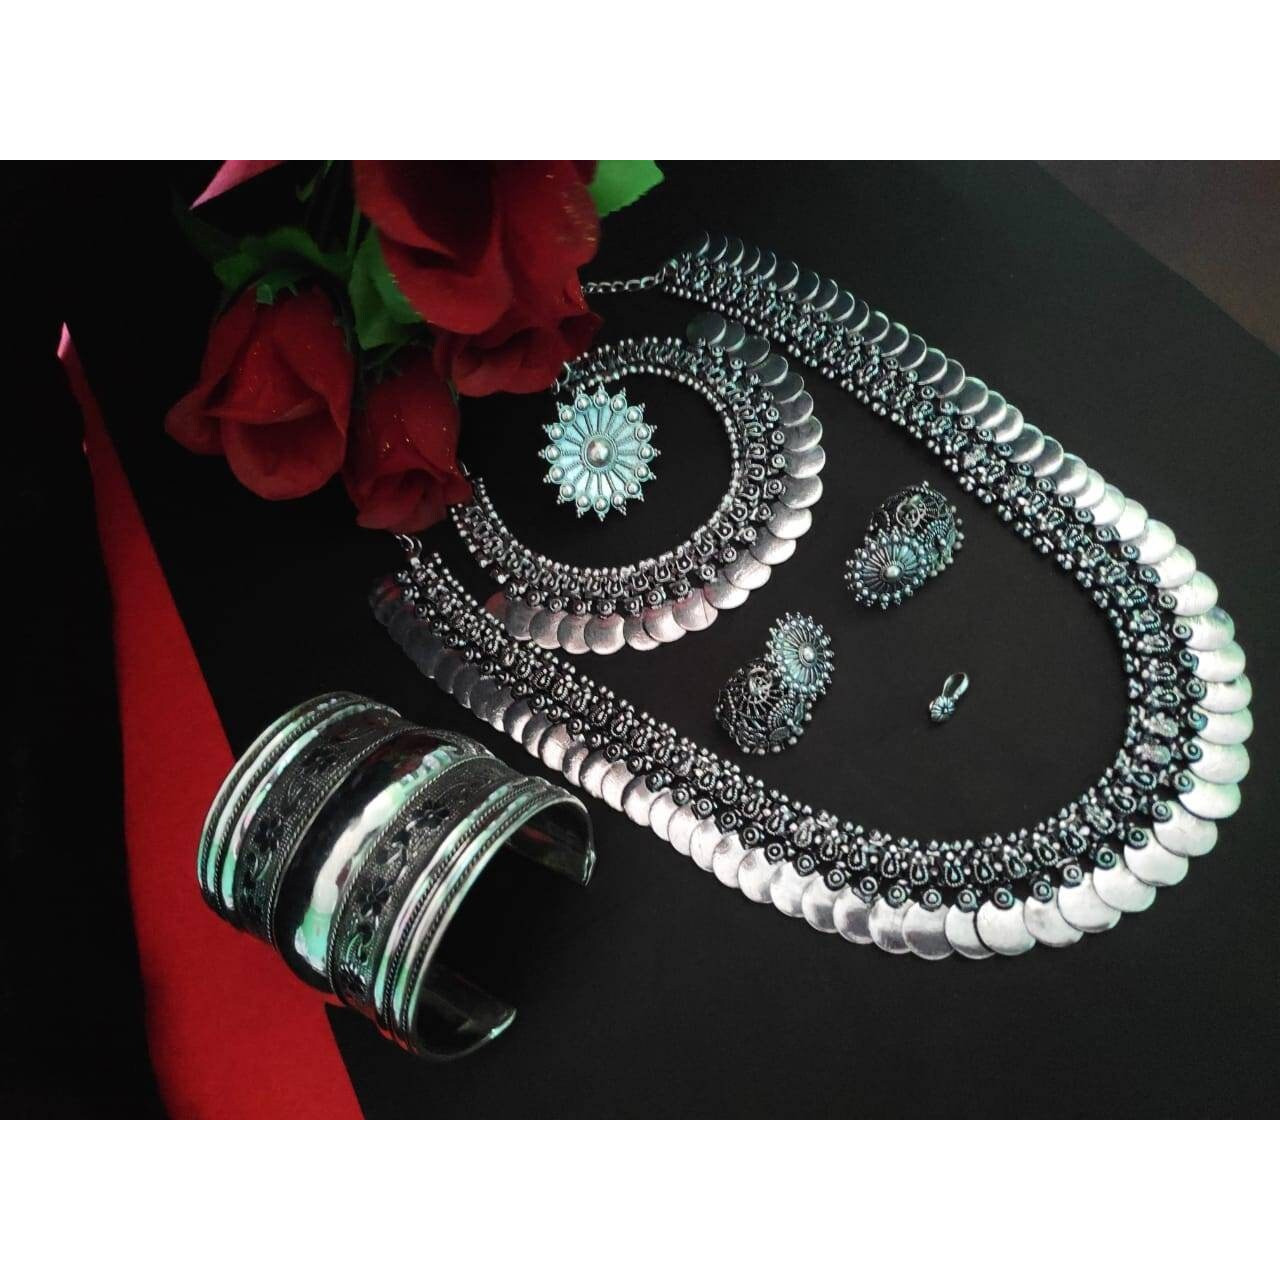 Add charm and Charisma to your beautiful personality with this exquisitely designed and handcrafted German Silver and oxidised necklace and earrings combo set pair it with any casual semi formal or informal attire and gather compliments for unique and classy choice ideal wear for both casual and dressy occasions